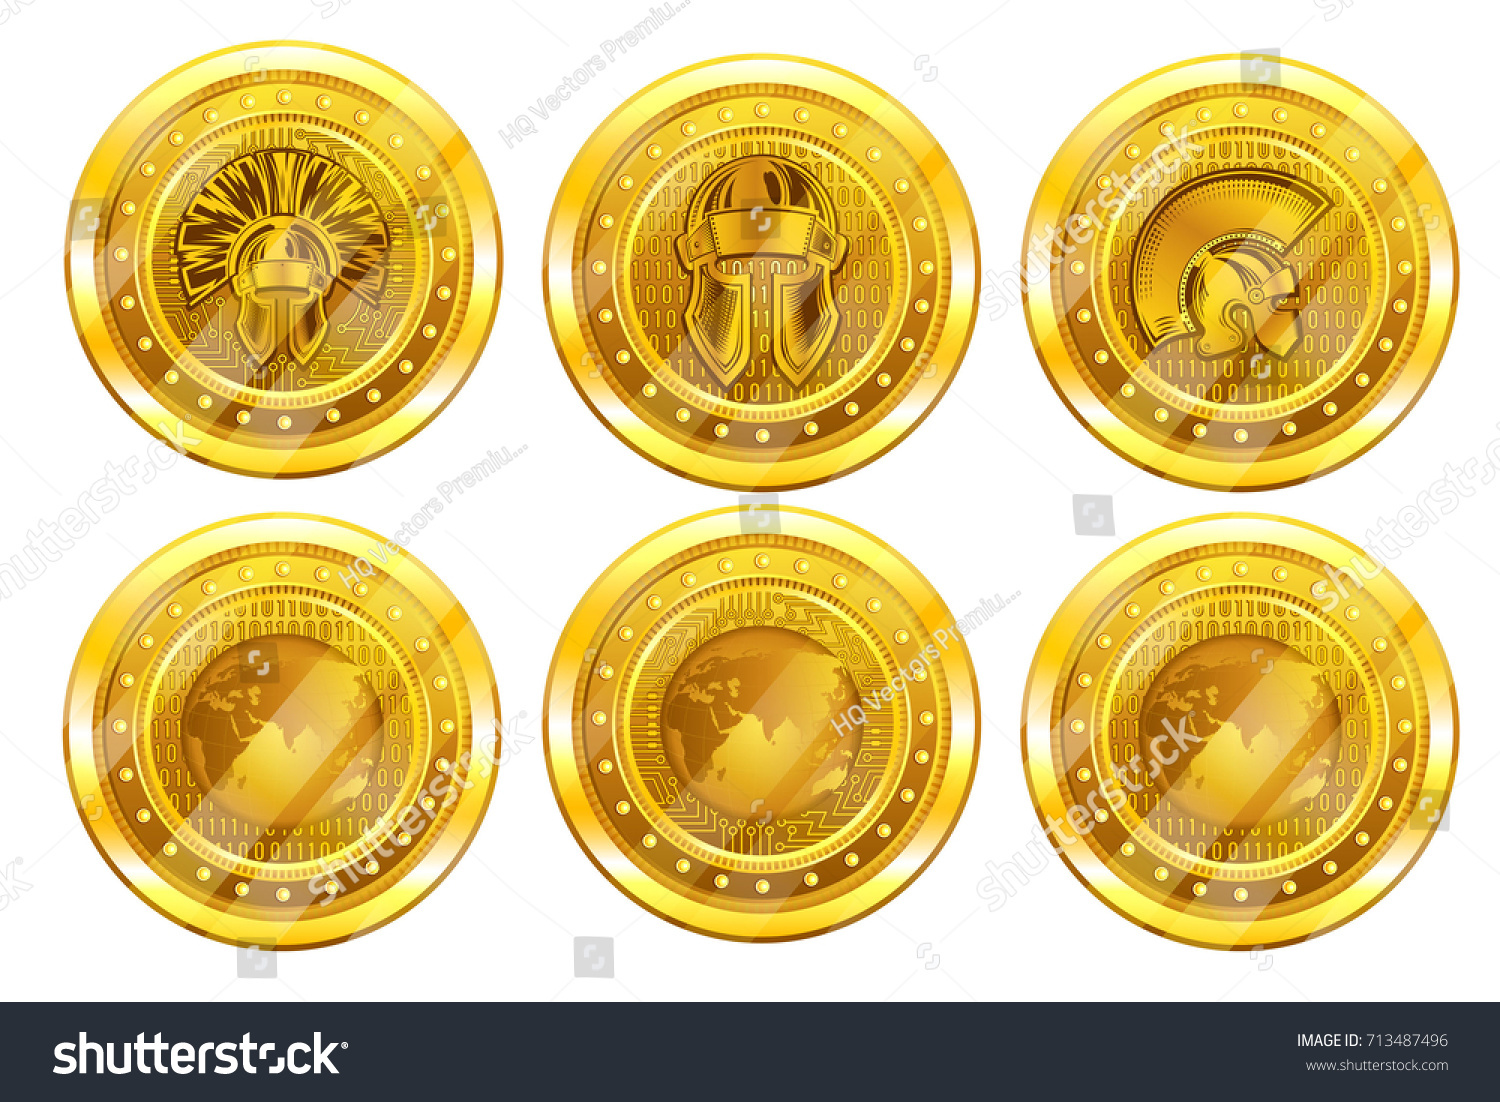 SVG of Set of golden cry pto coins, bit coin or titan back and front side. Vector Illustration isolated on white background svg